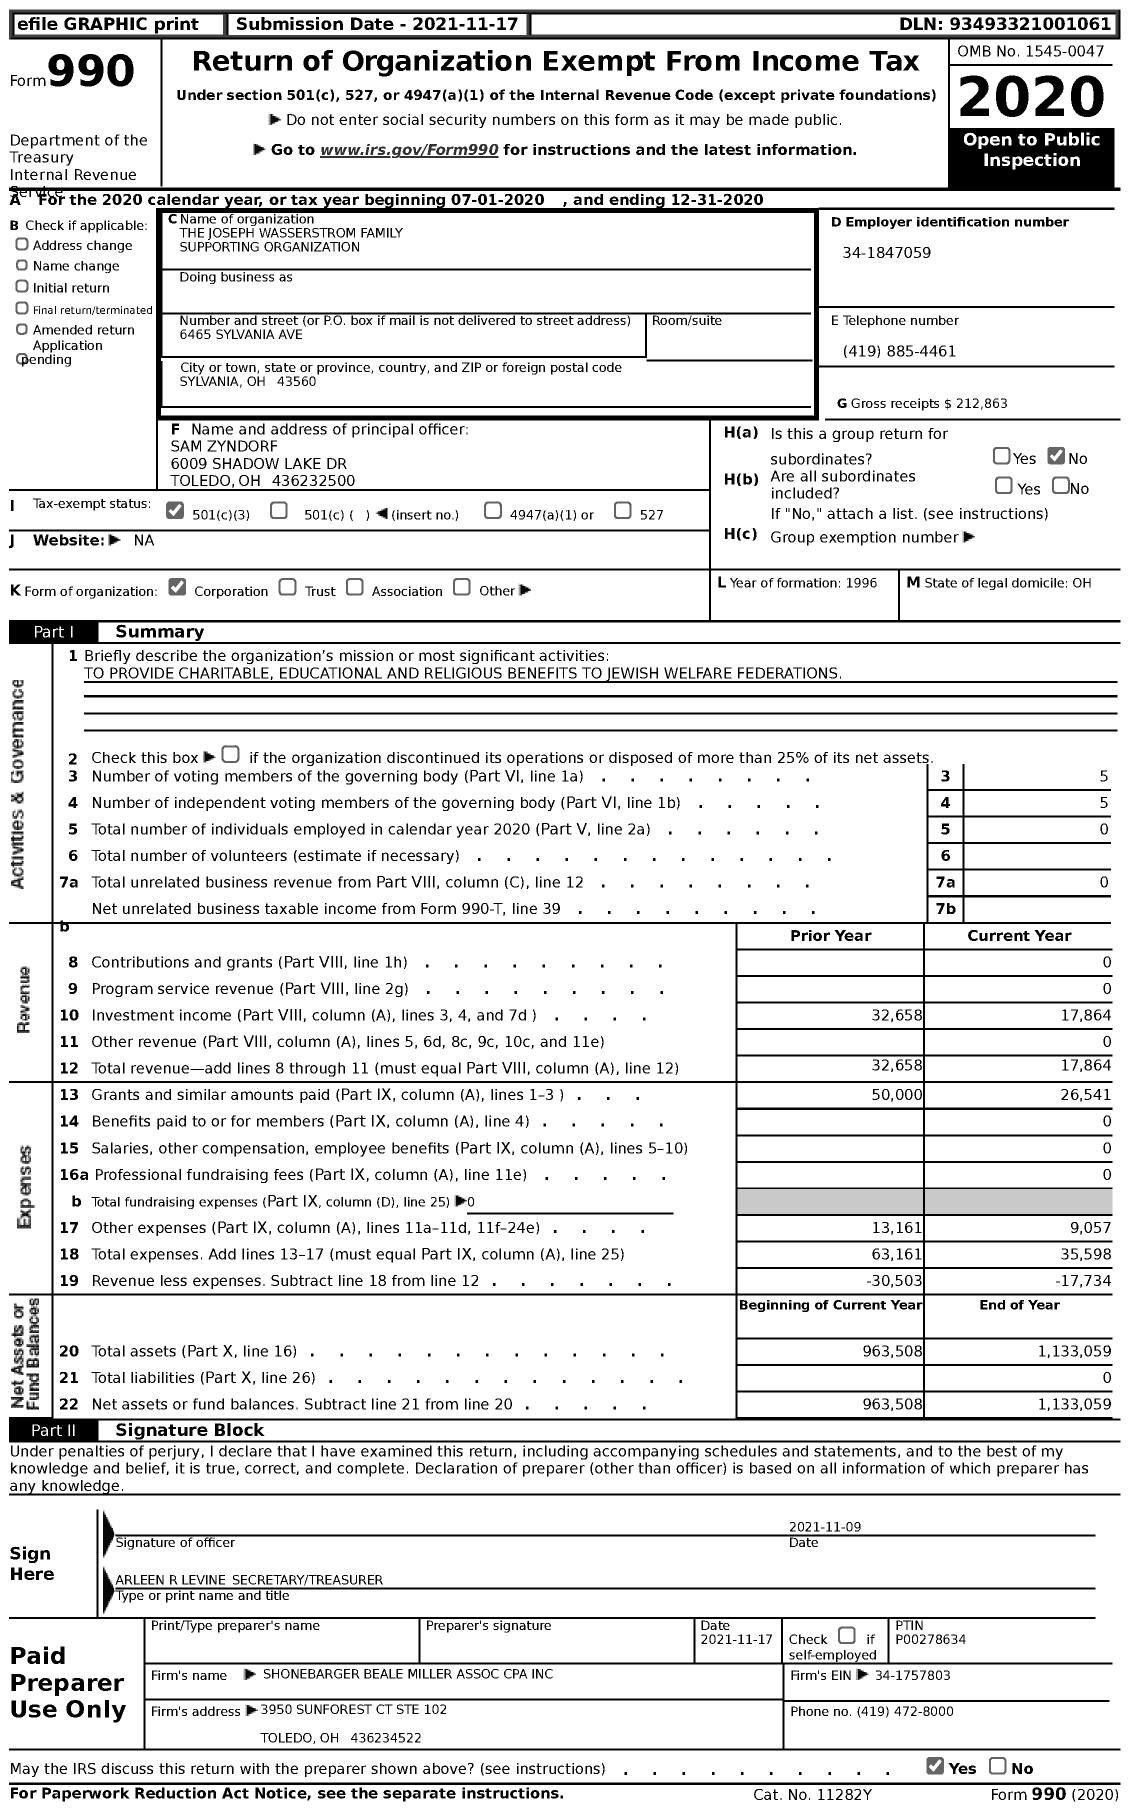 Image of first page of 2020 Form 990 for The Joseph Wasserstrom Family Supporting Organization